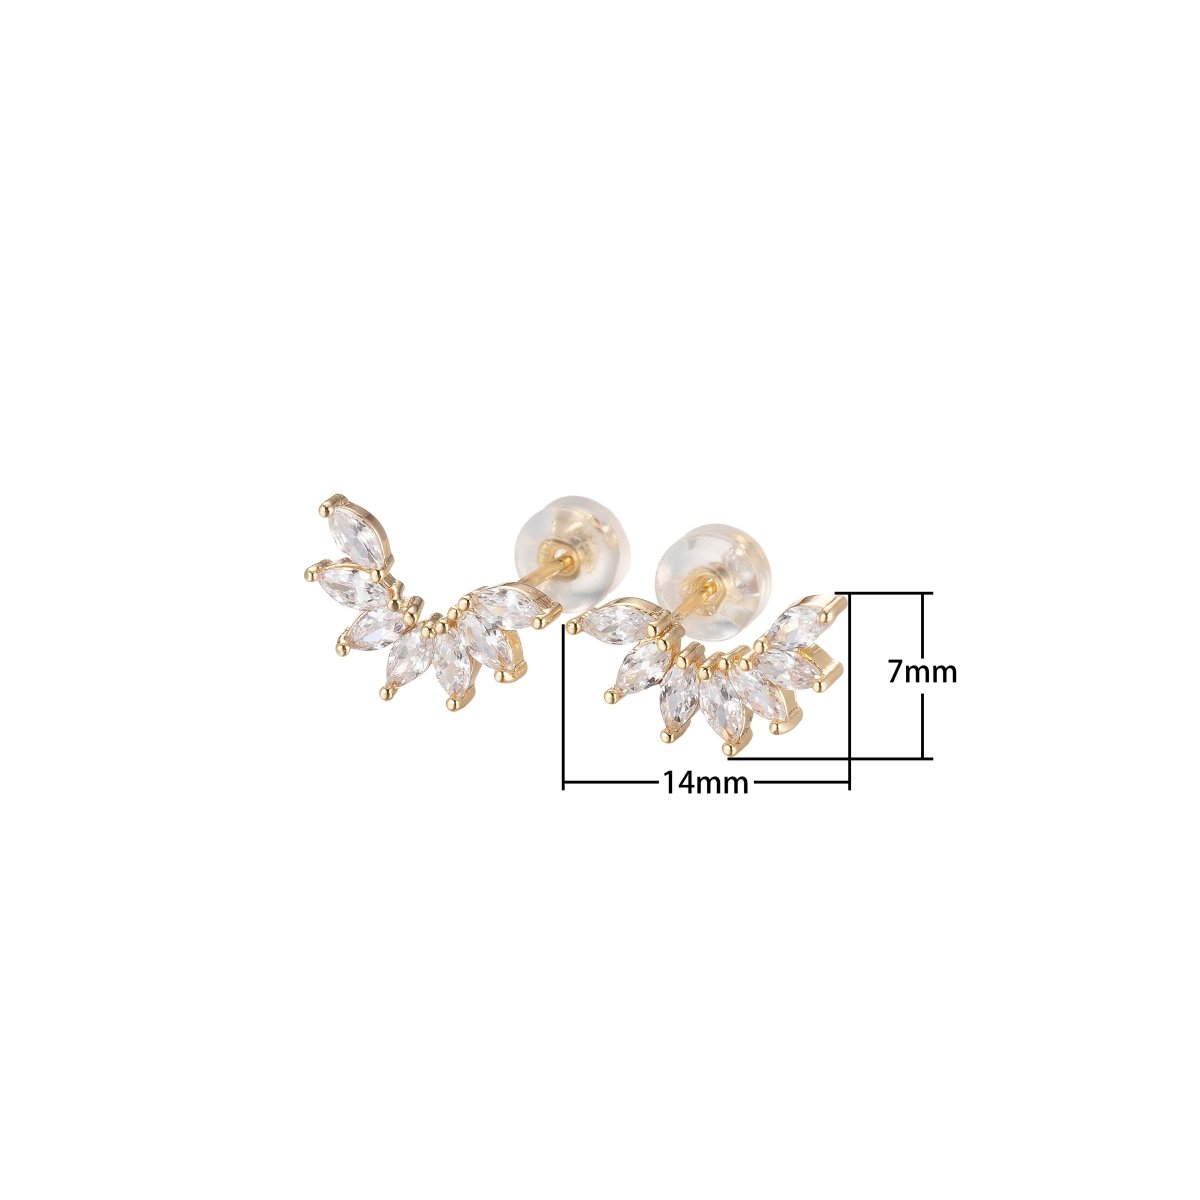 Crystal Sparky Leaves Studs Earring CZ Stone Floral Nature Blooming Crystal Leaves Earring Jewelry P-200 - DLUXCA